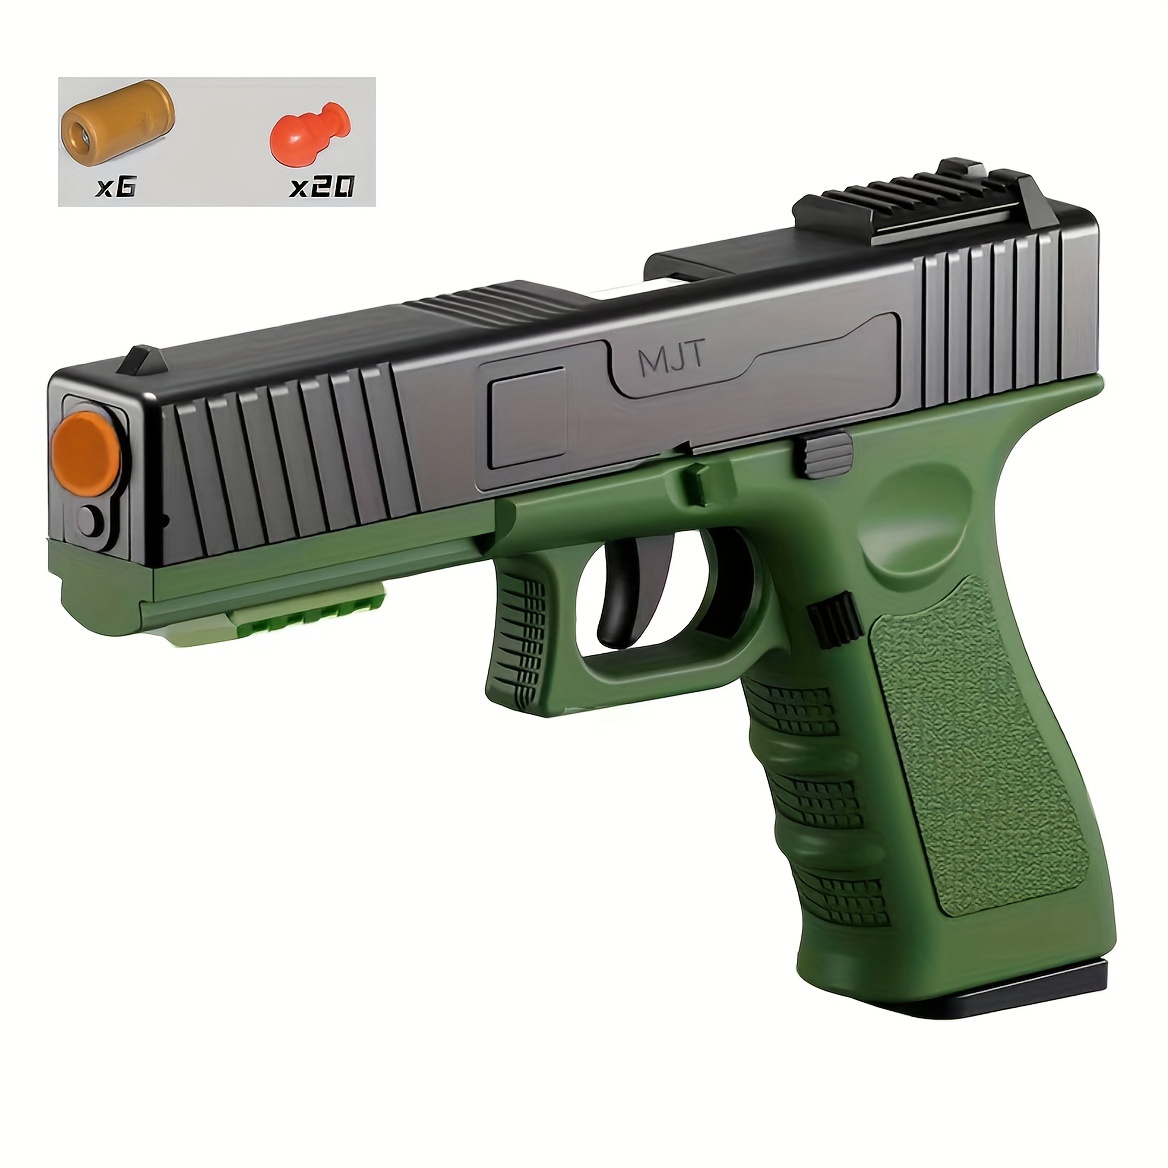 M1911 Automatic Shell Ejection Soft Bullet Toy Gun G17 Airsoft Pistol Armas  Children CS Shooting Weapons Gun Toy for Boys - AliExpress